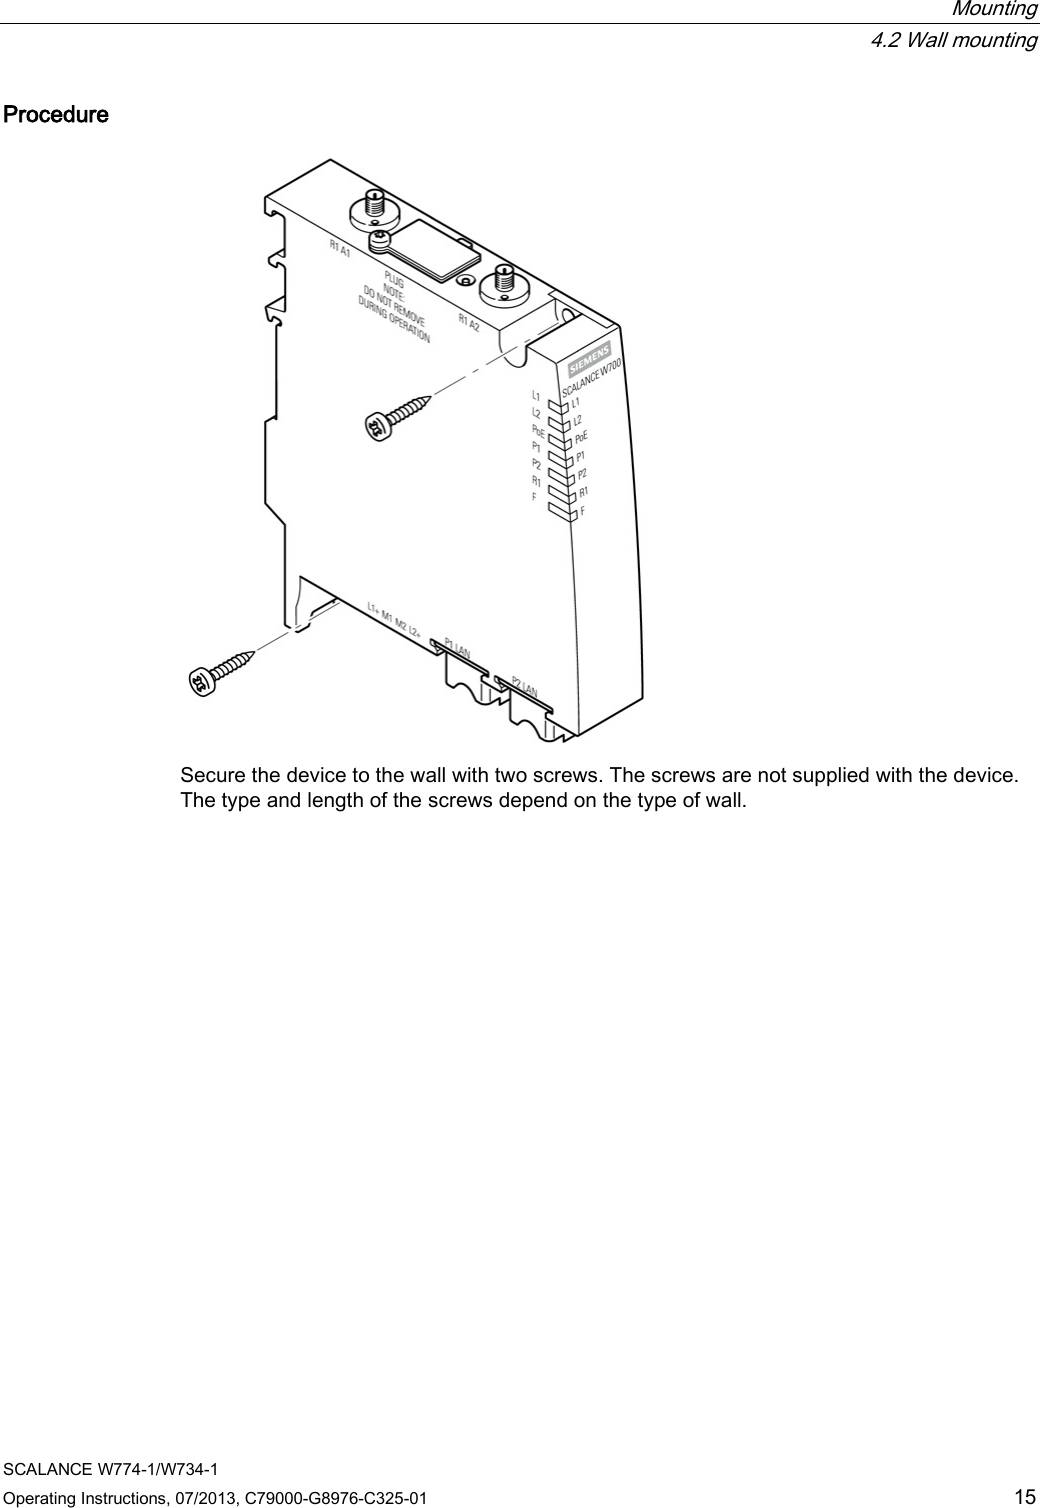  Mounting  4.2 Wall mounting SCALANCE W774-1/W734-1 Operating Instructions, 07/2013, C79000-G8976-C325-01 15 Procedure  Secure the device to the wall with two screws. The screws are not supplied with the device. The type and length of the screws depend on the type of wall. 